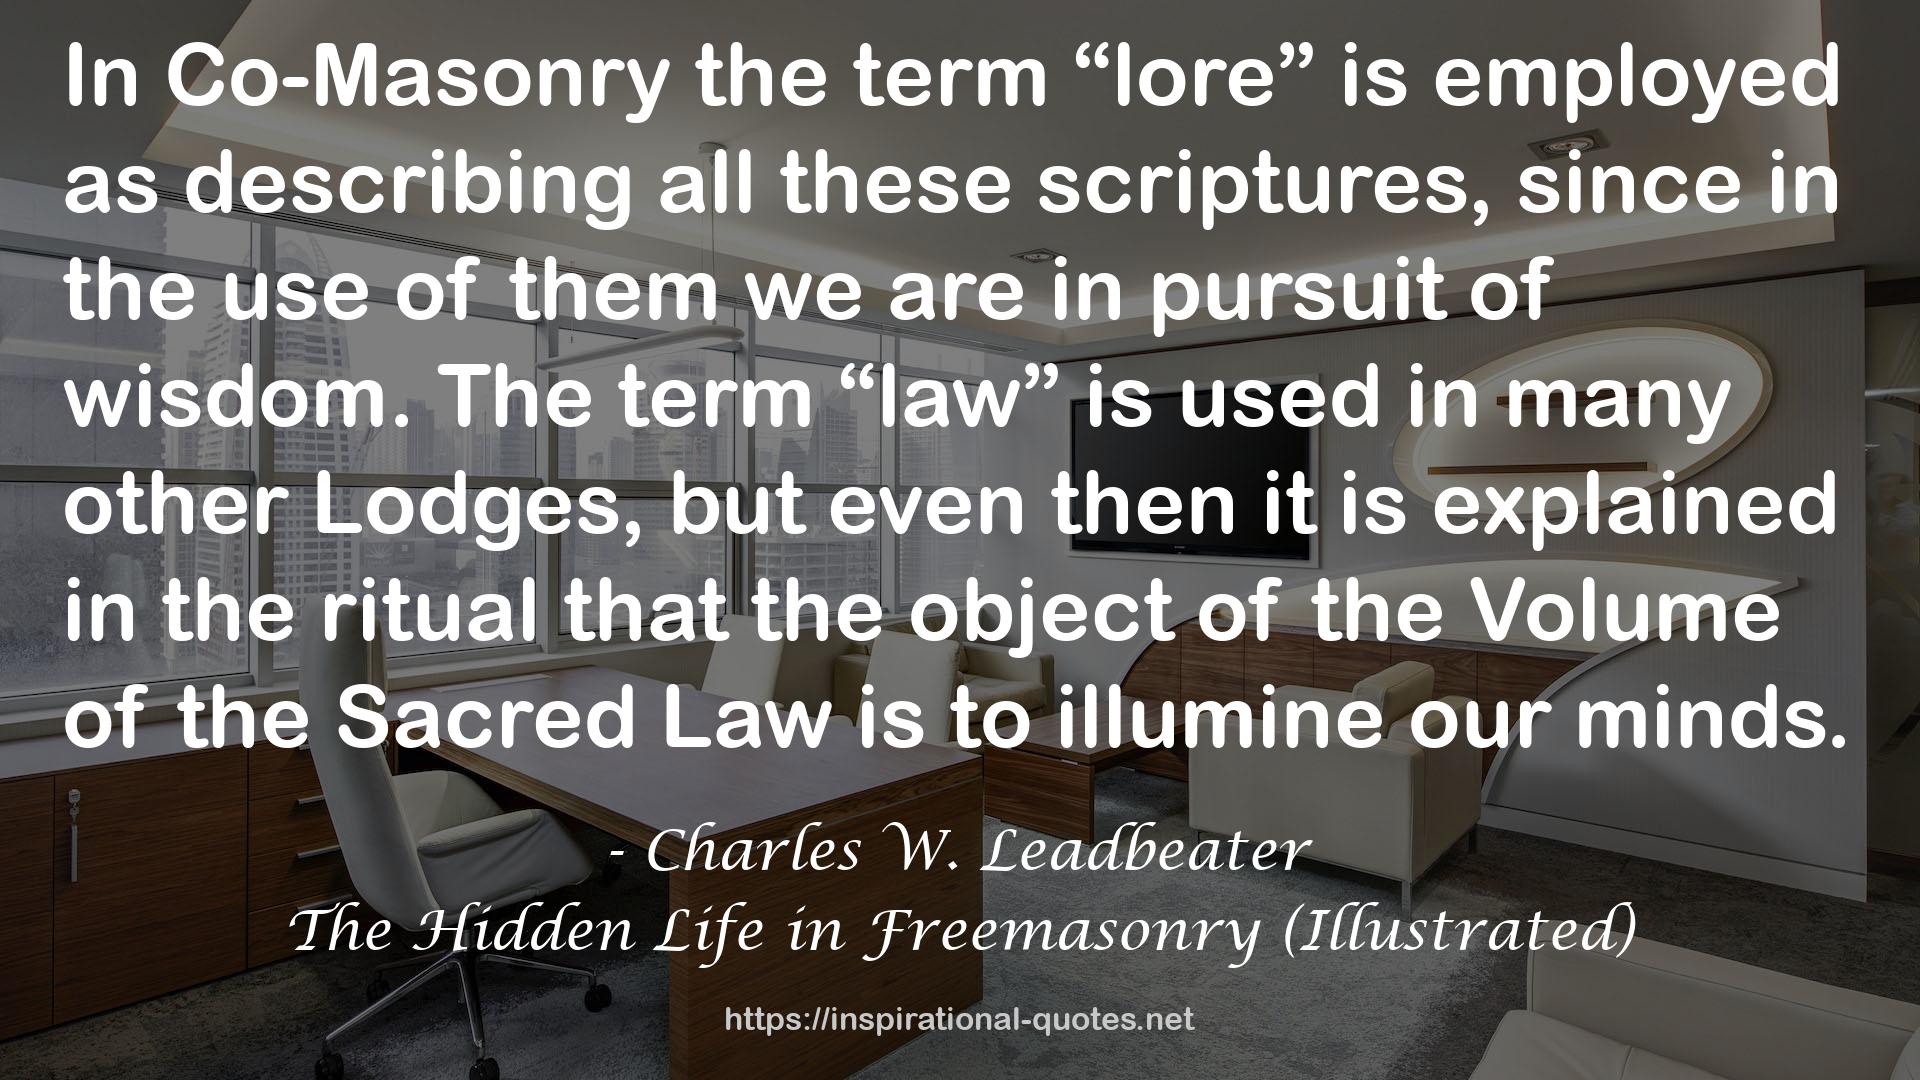 The Hidden Life in Freemasonry (Illustrated) QUOTES